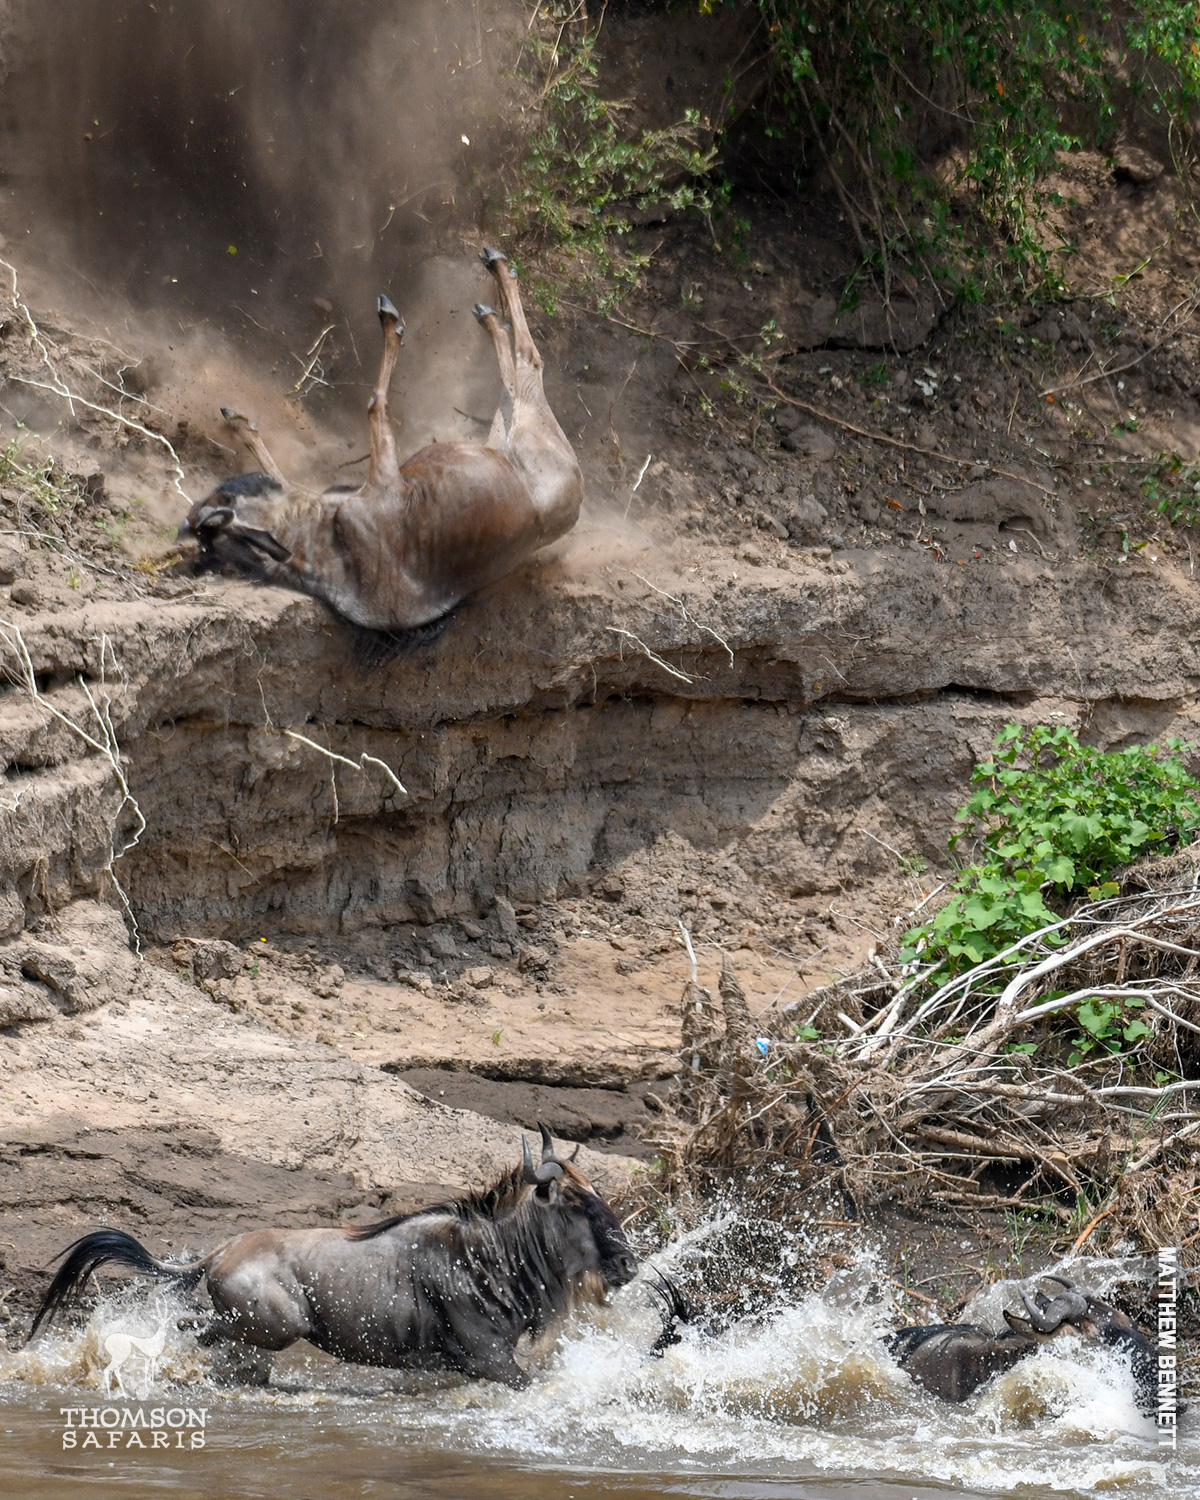 wildebeest falls off the banks of the mara river 